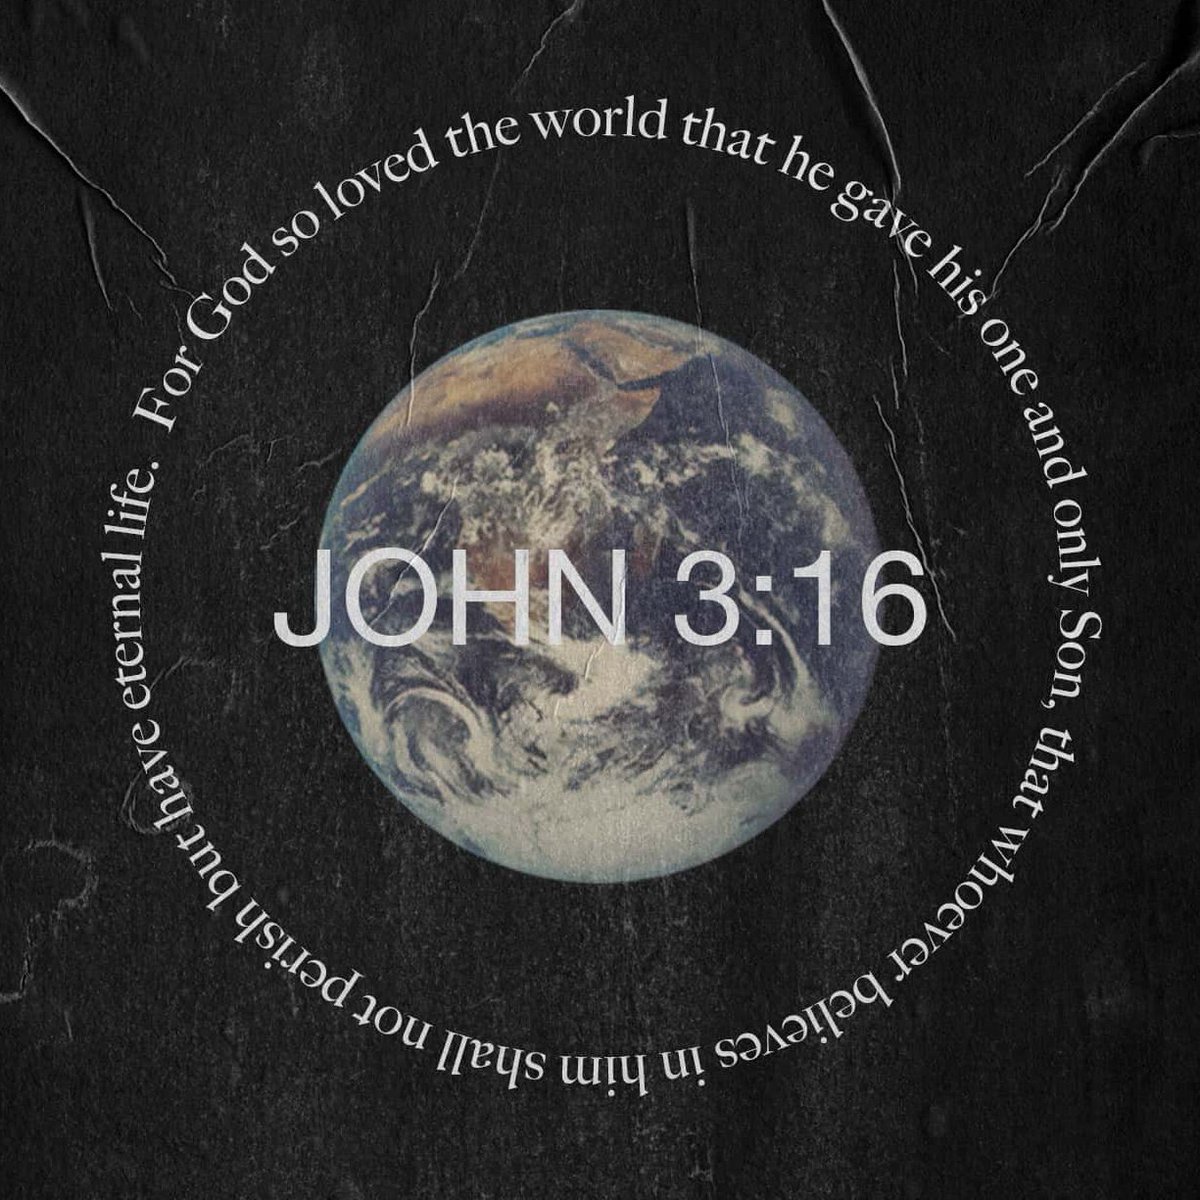 “For God so loved the world, that he gave his only begotten Son, that whosoever believeth in him should not perish, but have everlasting life.  For God sent not his Son into the world to condemn the world; but that the world through him might be saved.”
- John 3:16-17 KJV